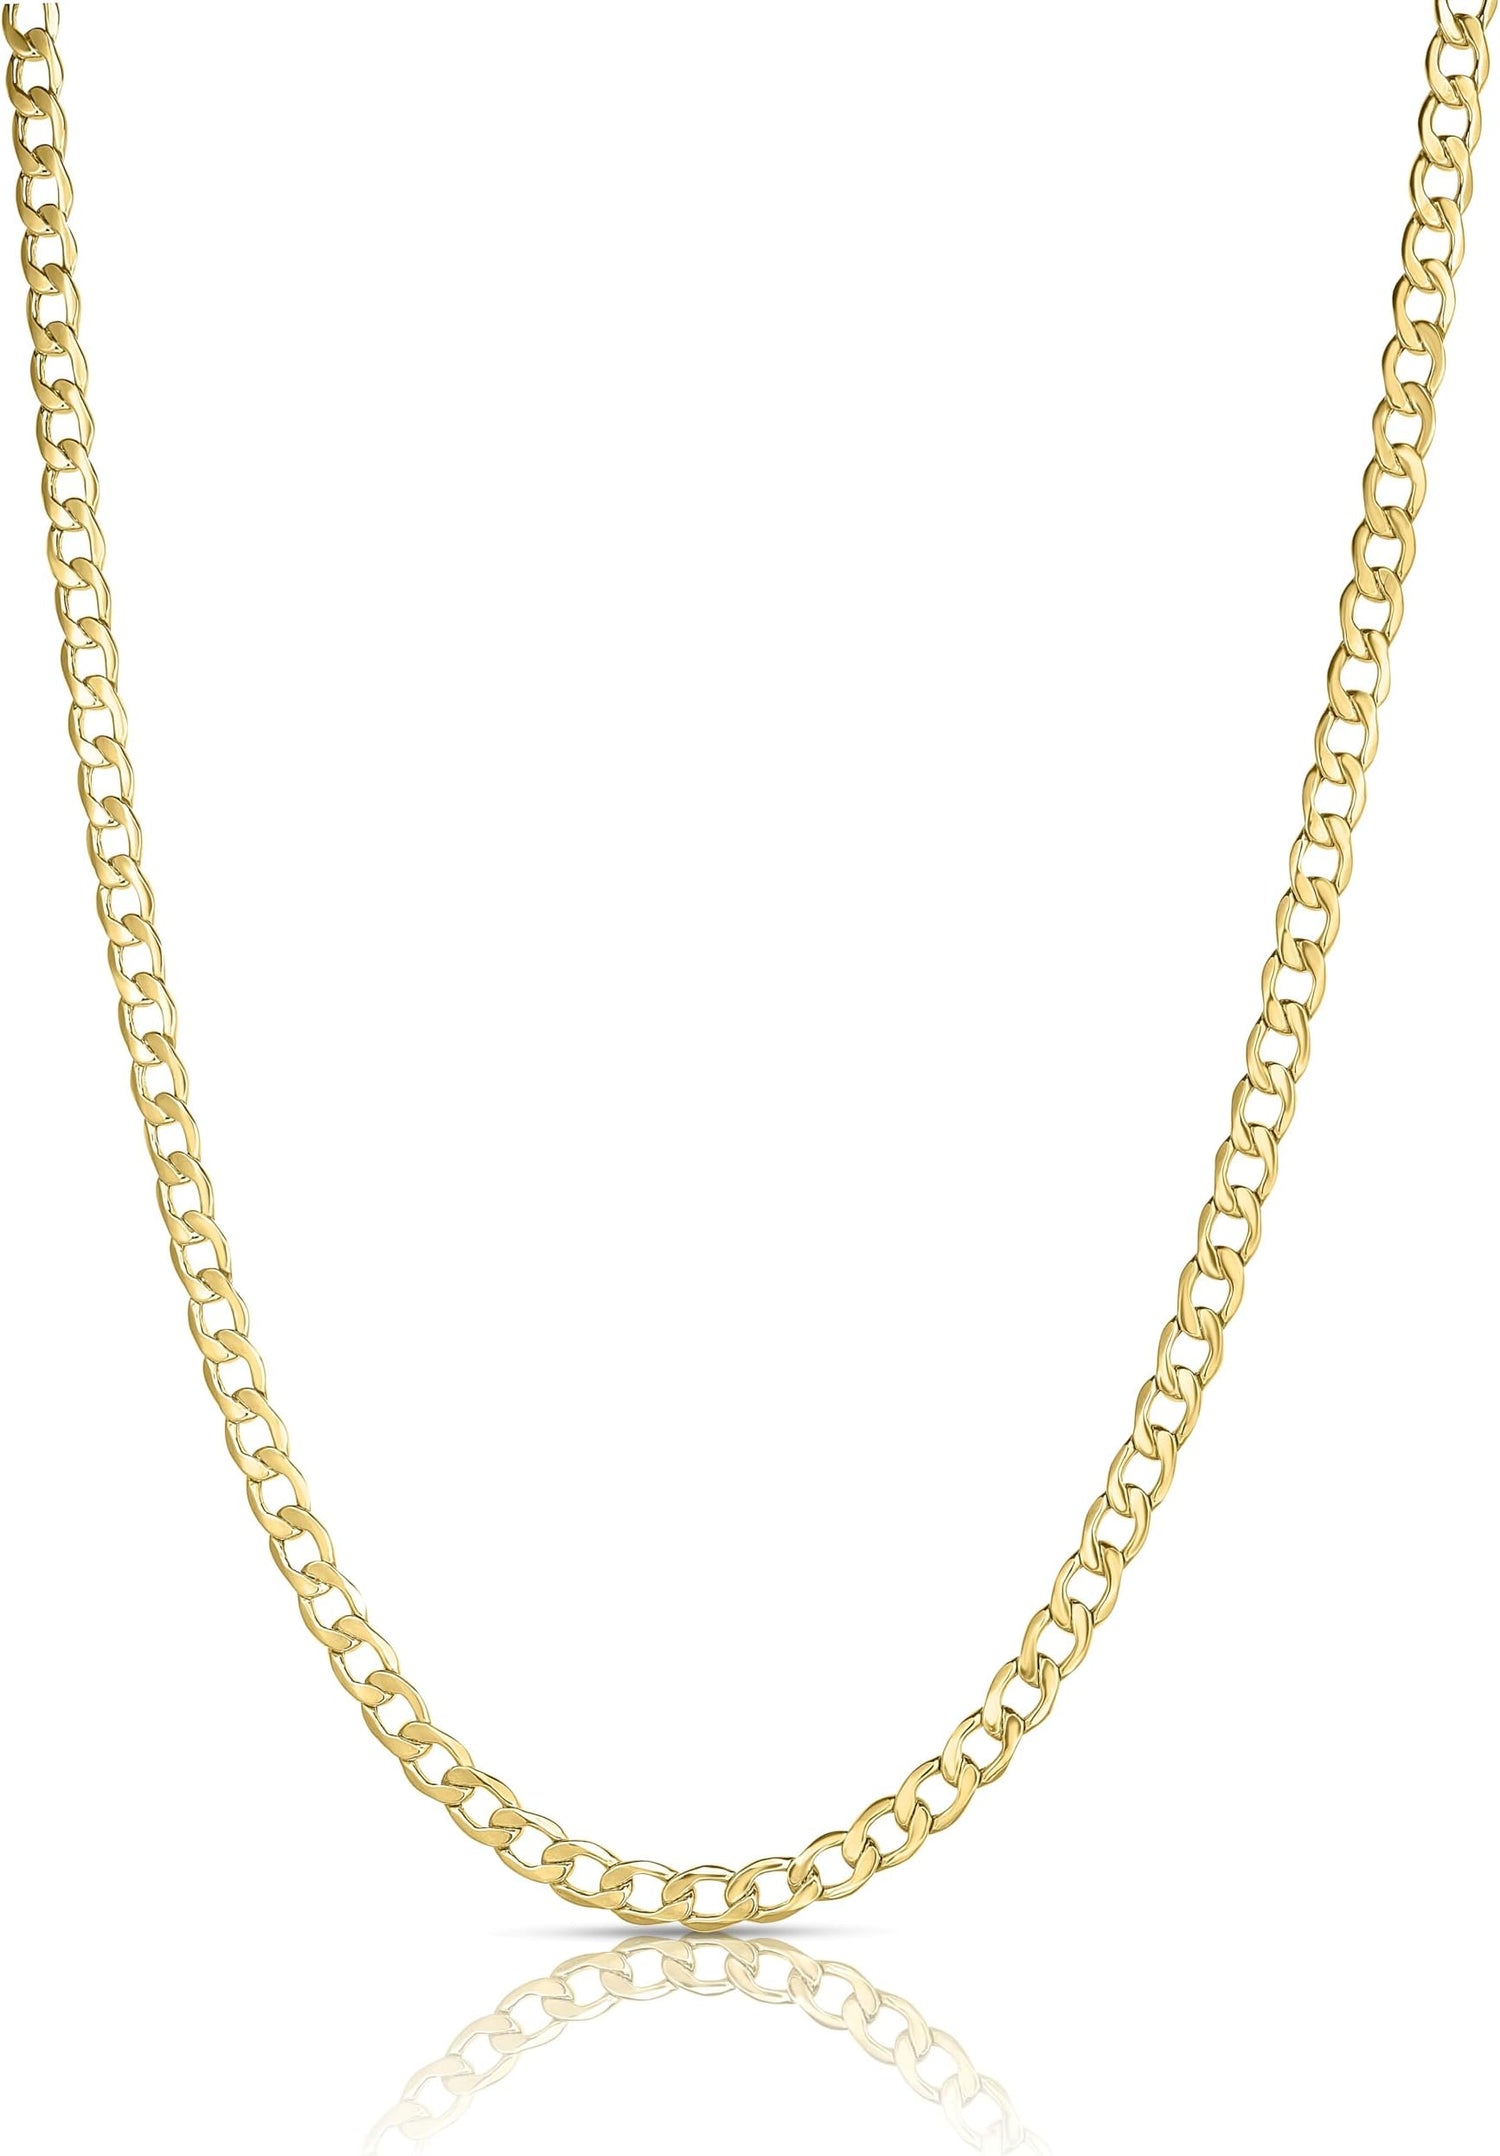 10k Yellow Gold 4mm Hollow Cuban Curb Link Chain Necklace